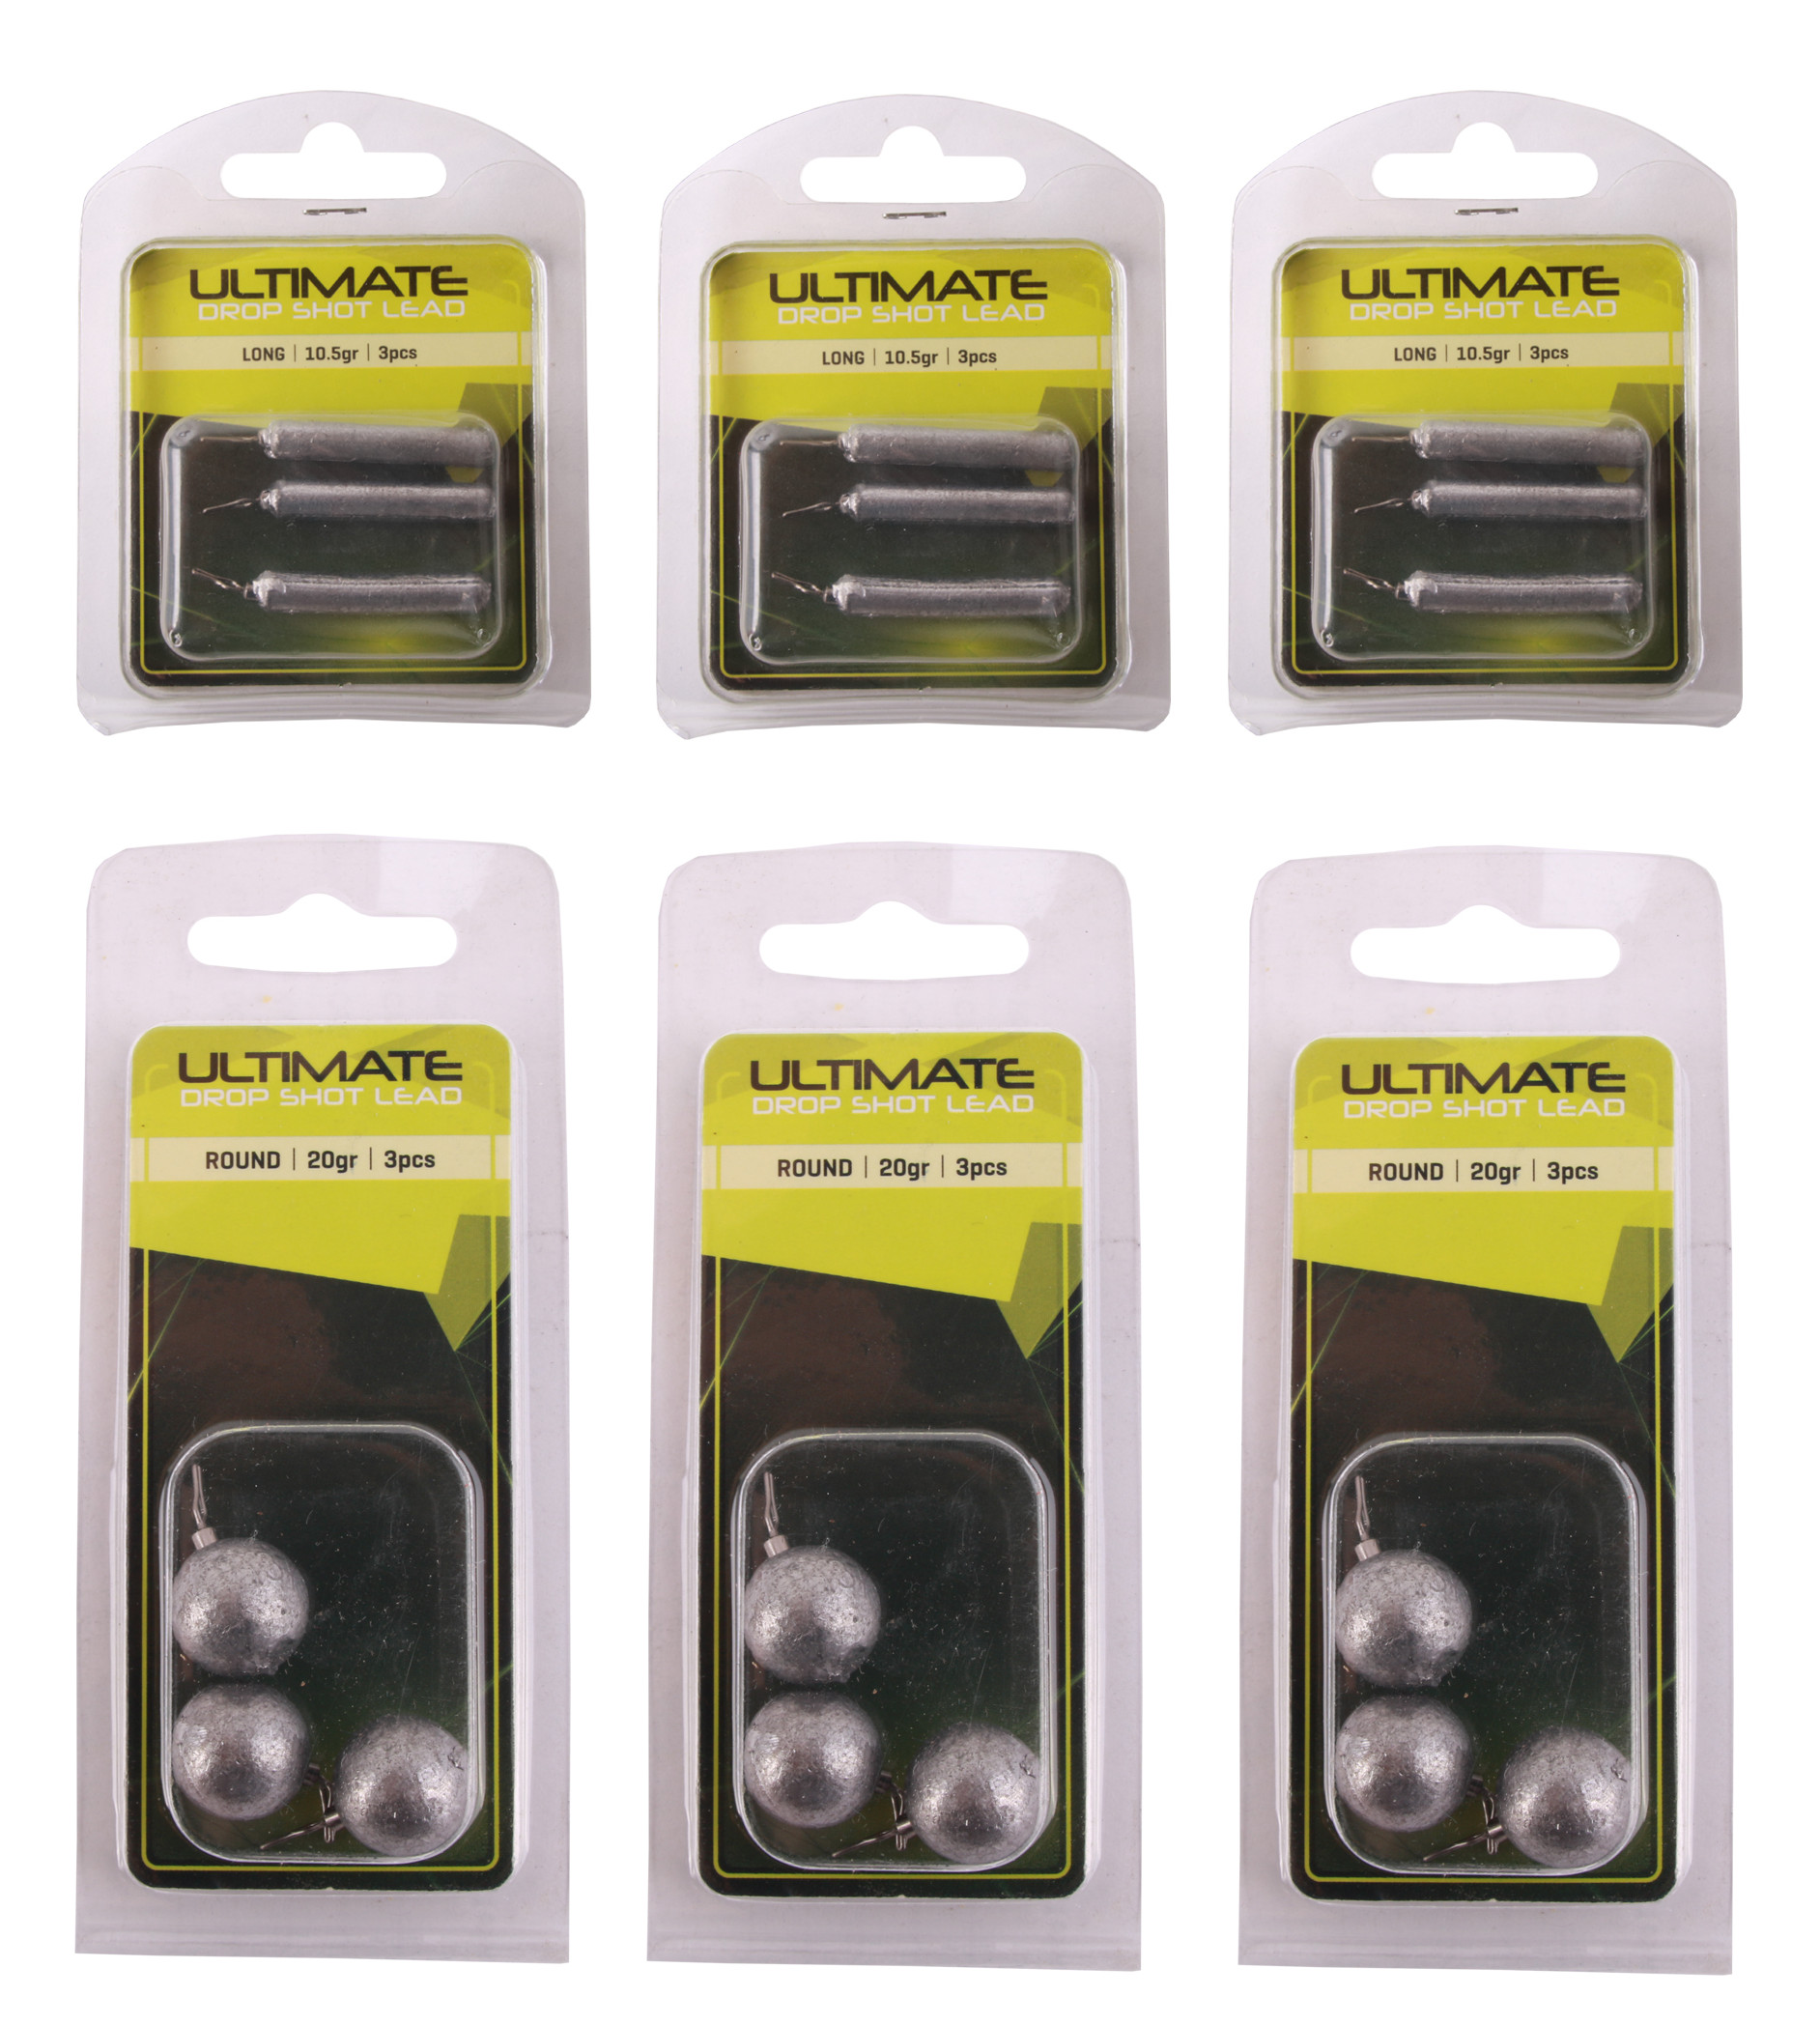 18 pcs Ultimate Dropshot lead in different weights